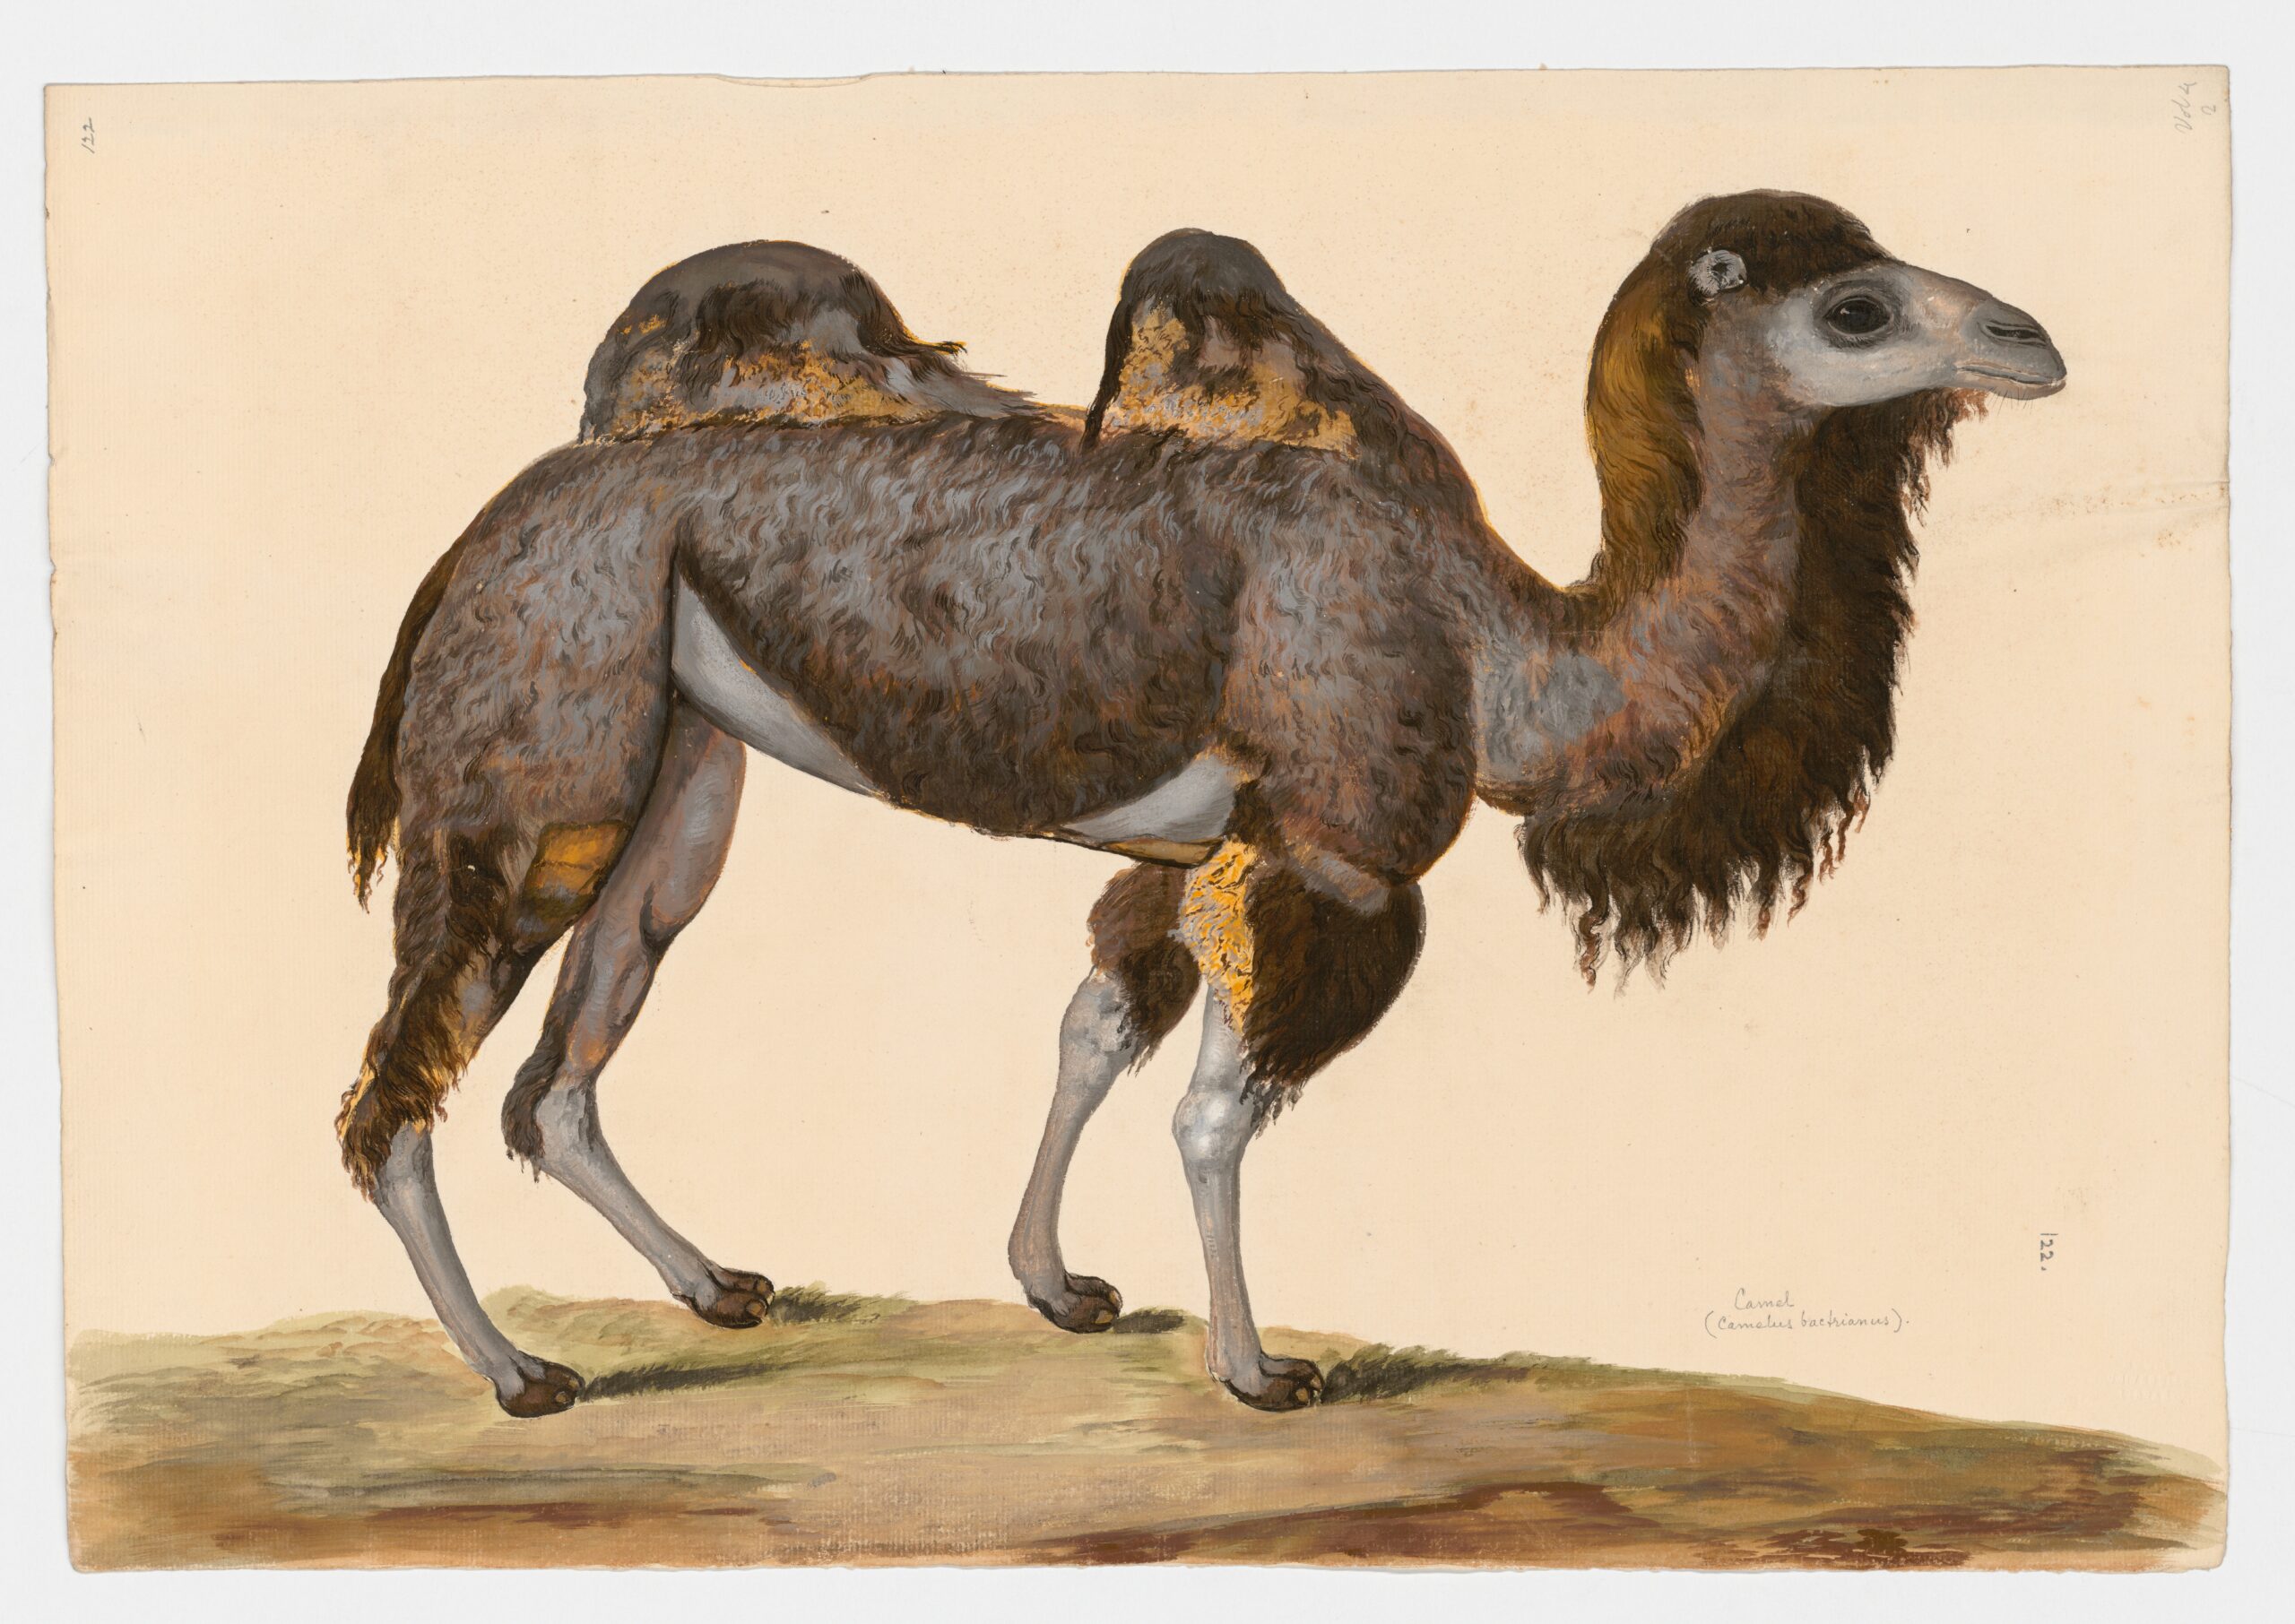 Bactrian camel (Camelus bactrianus), watercolour by Peter Paillou, undated. Taylor White Collection: MSG BW002, item 122. BlackerWood Collection, Rare Books & Special Collections, McGill Library